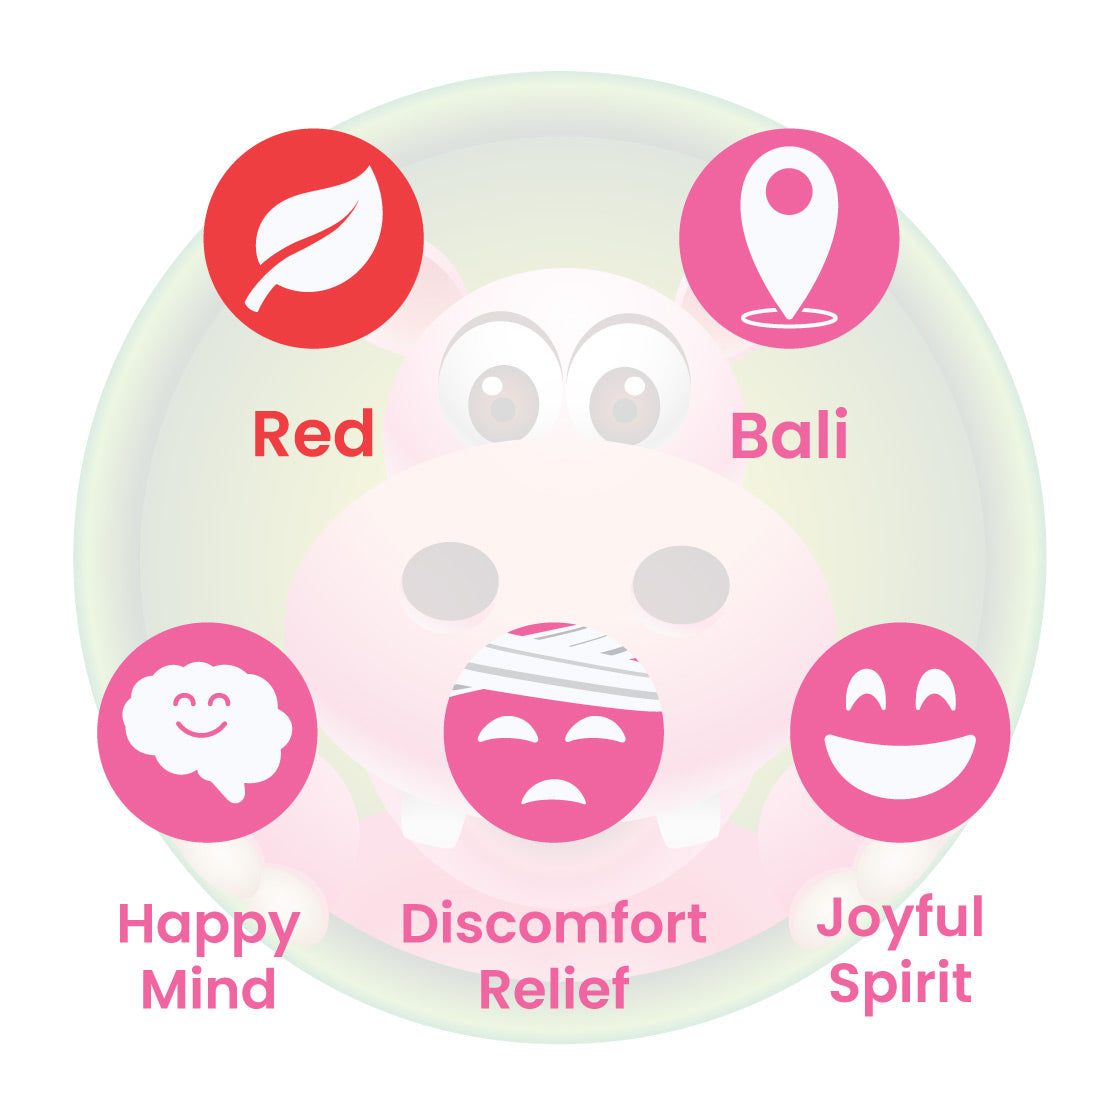 Infographic Details for Happy Hippo Red Vein Bali Kratom Powder. Leaf color: Red Vein. Kratom Strain Origin: Bali. Kratom Effects resonate with Happy Mind, Joyful Spirit, and Relief from Physical Discomfort.